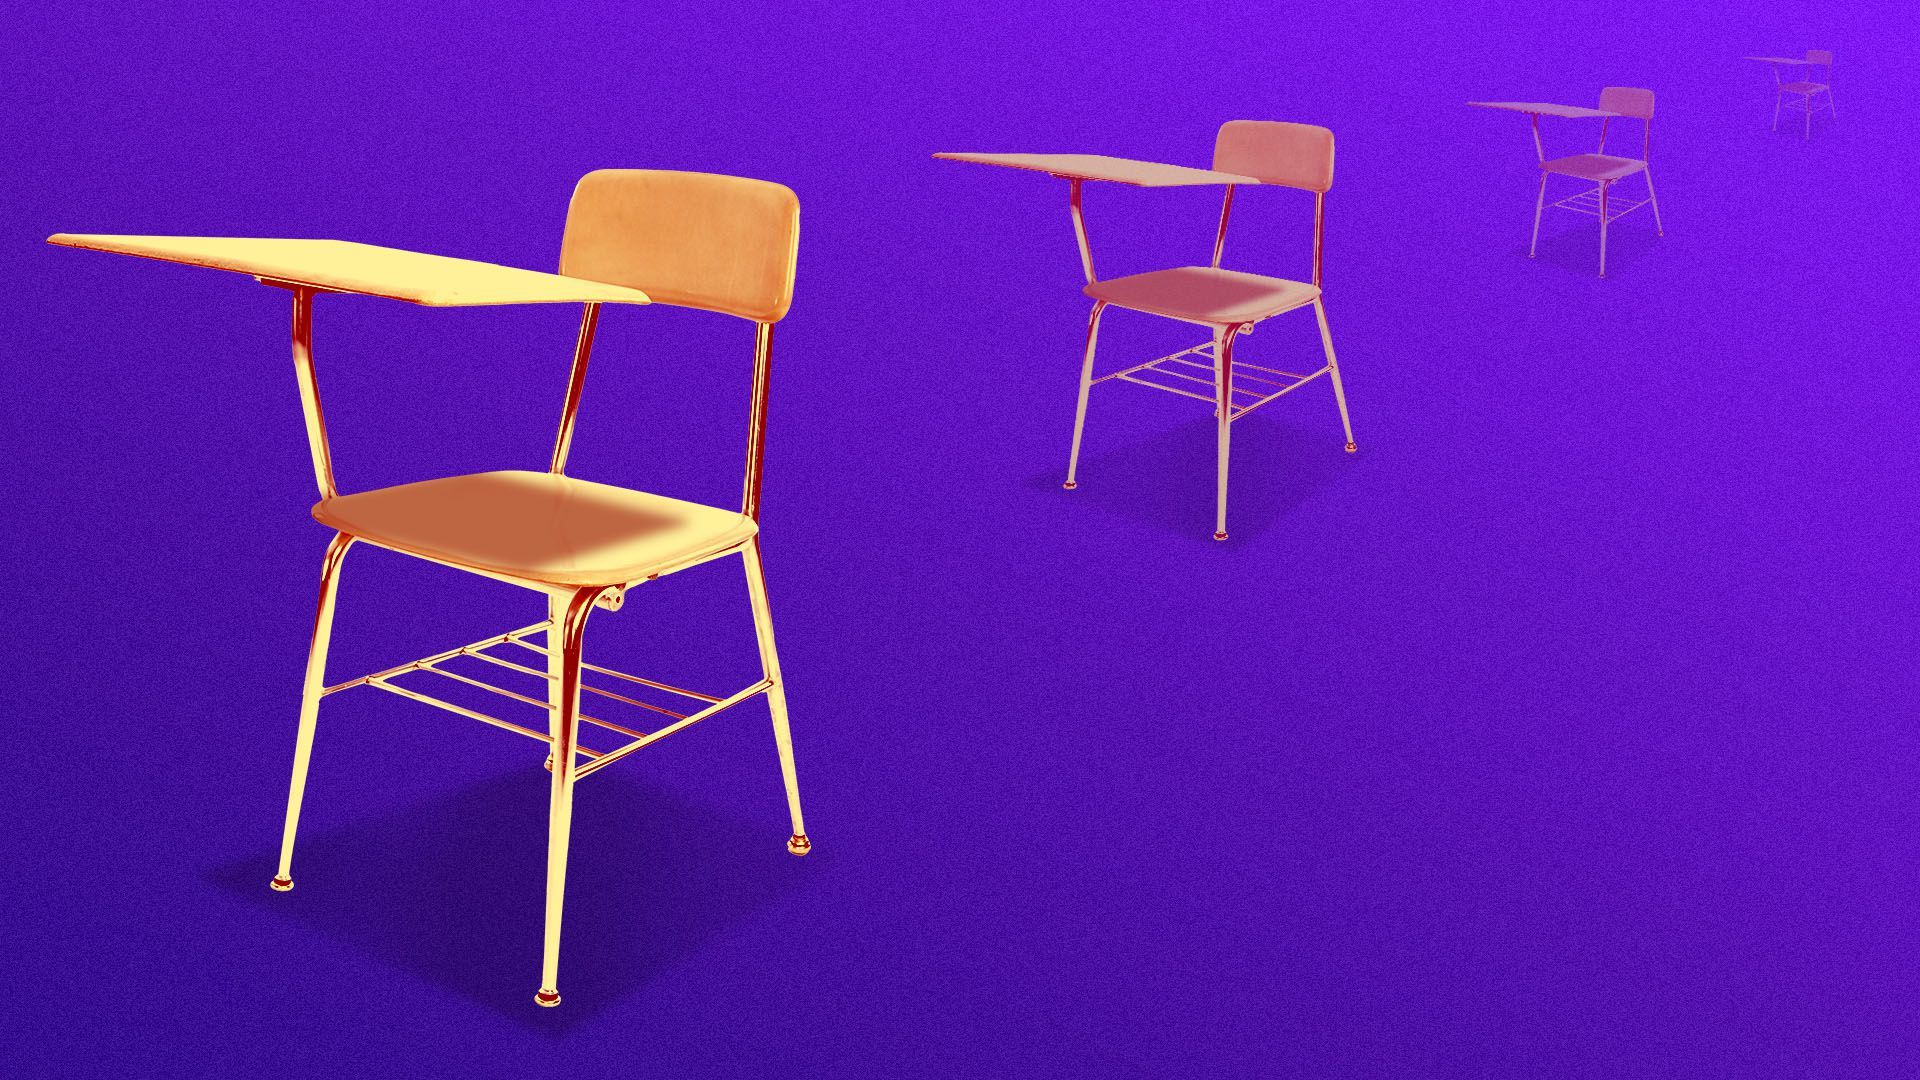 Illustration of a line of spaced out desks receding far into the background